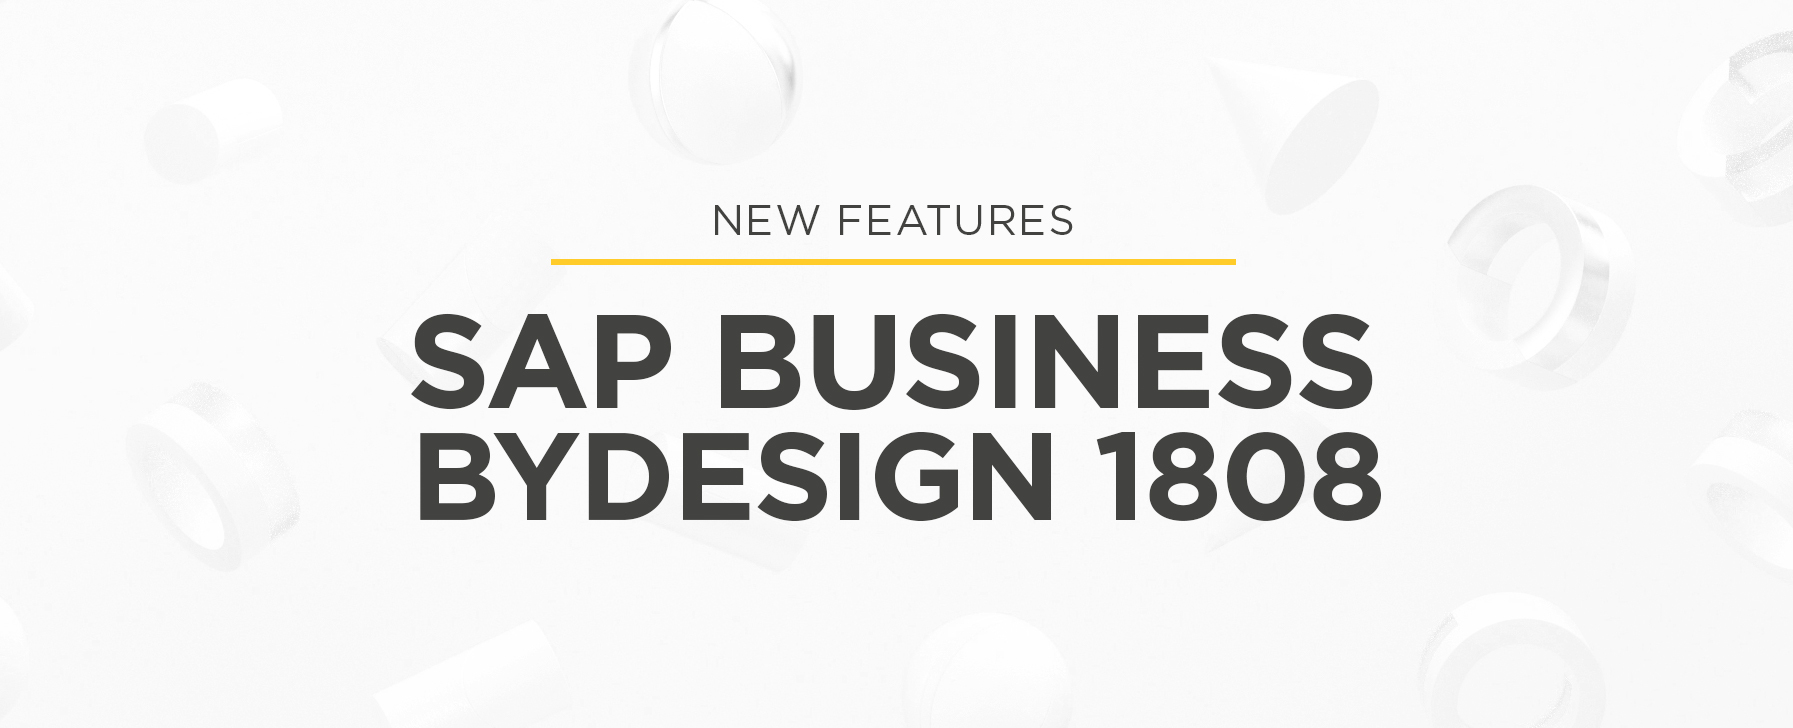 Features-of-SAP-Business-ByDesign-1808